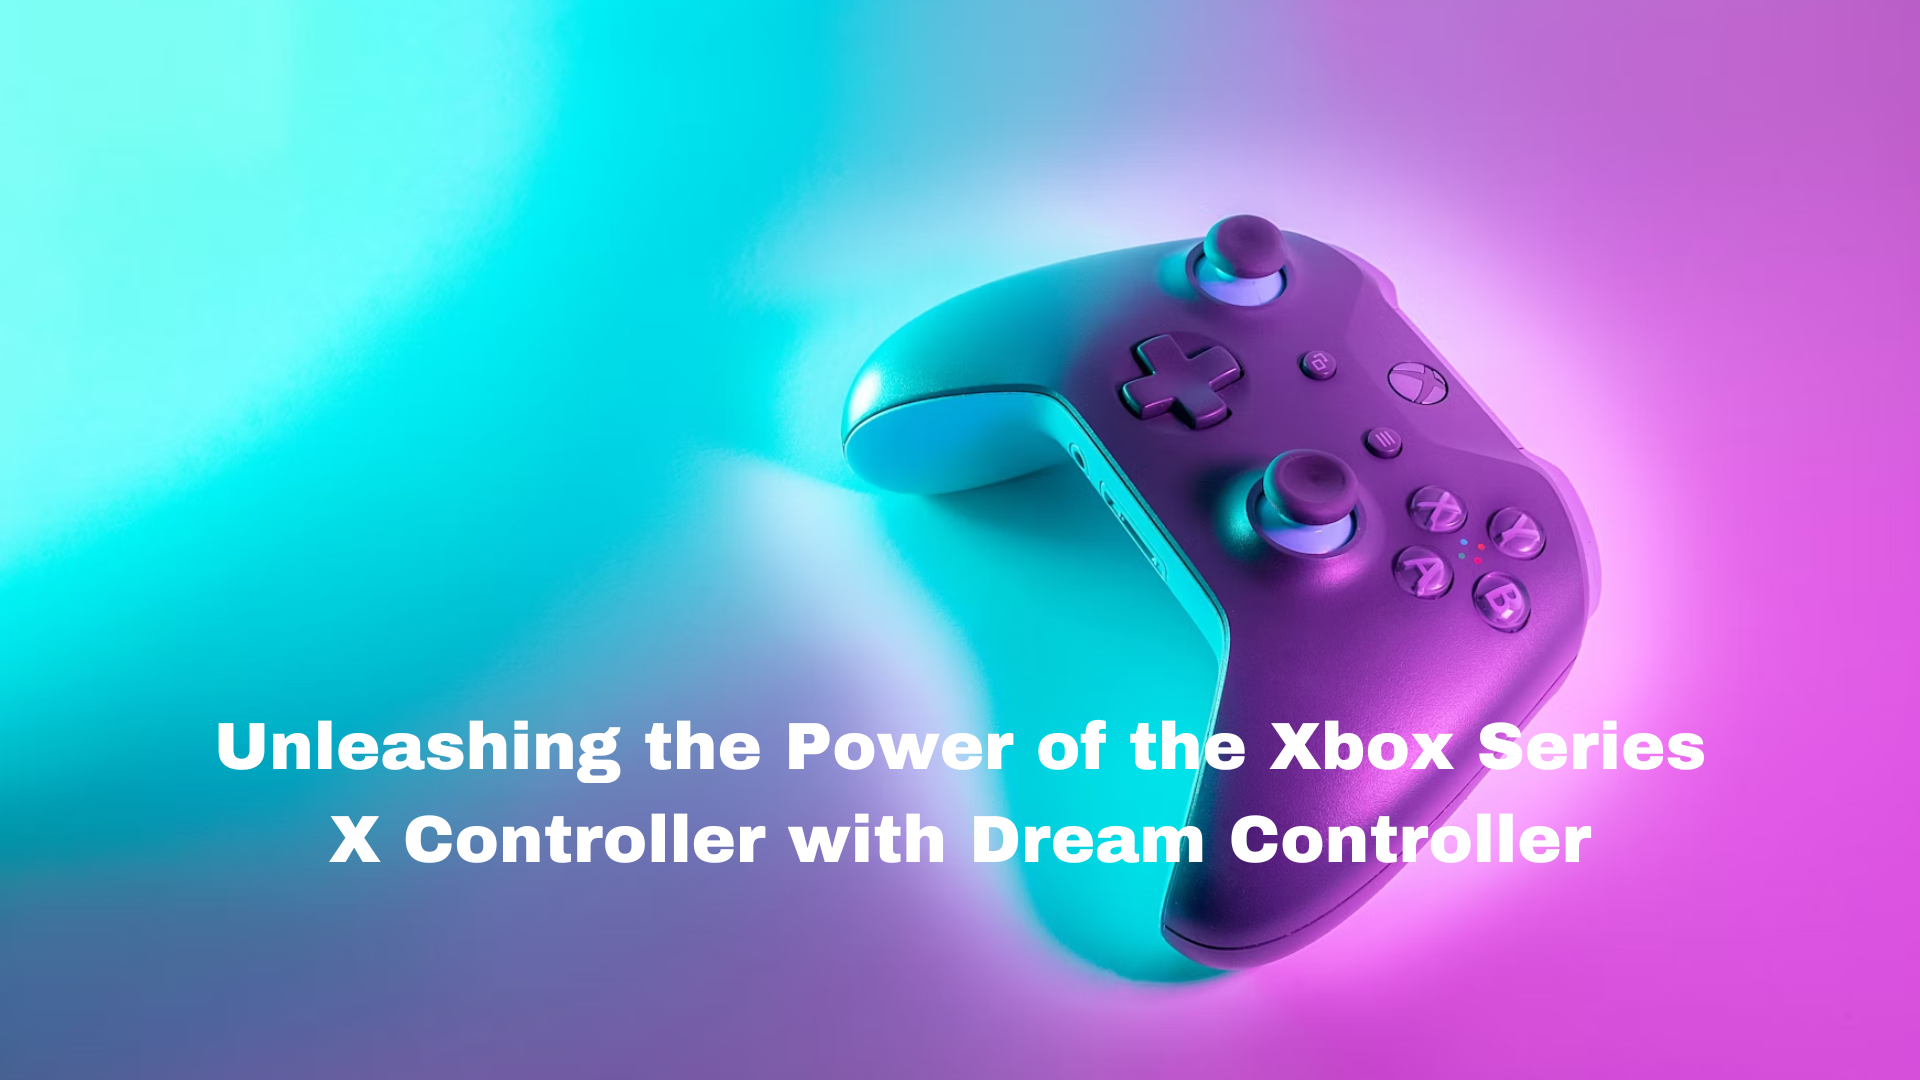 Unleashing the Power of the Xbox Series X Controller with Dream Controller